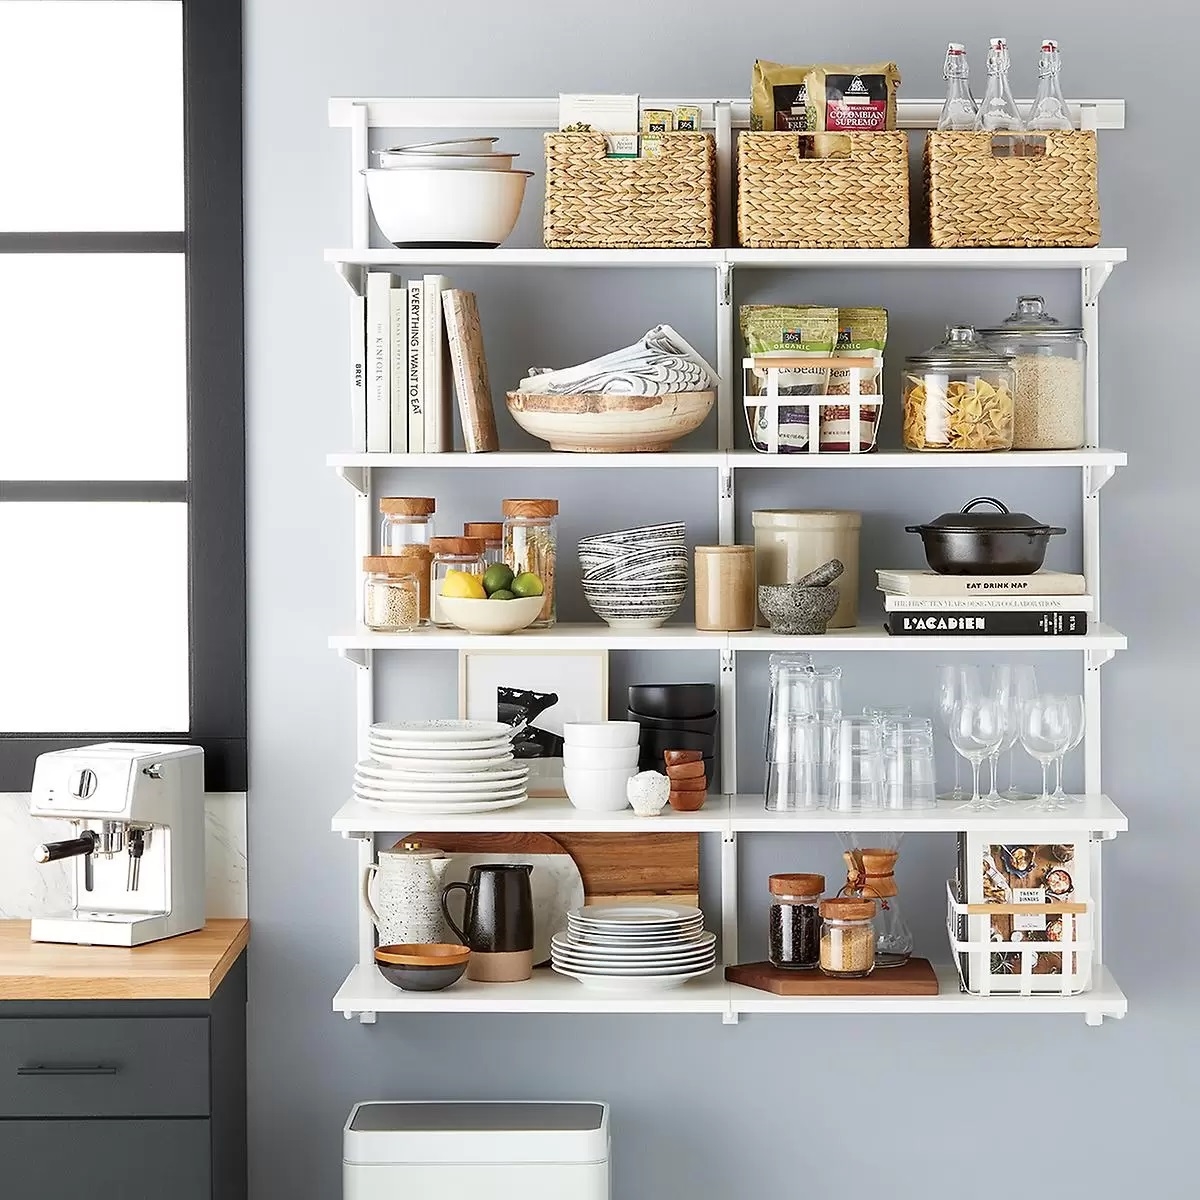 Open shelving with many items in kitchen.